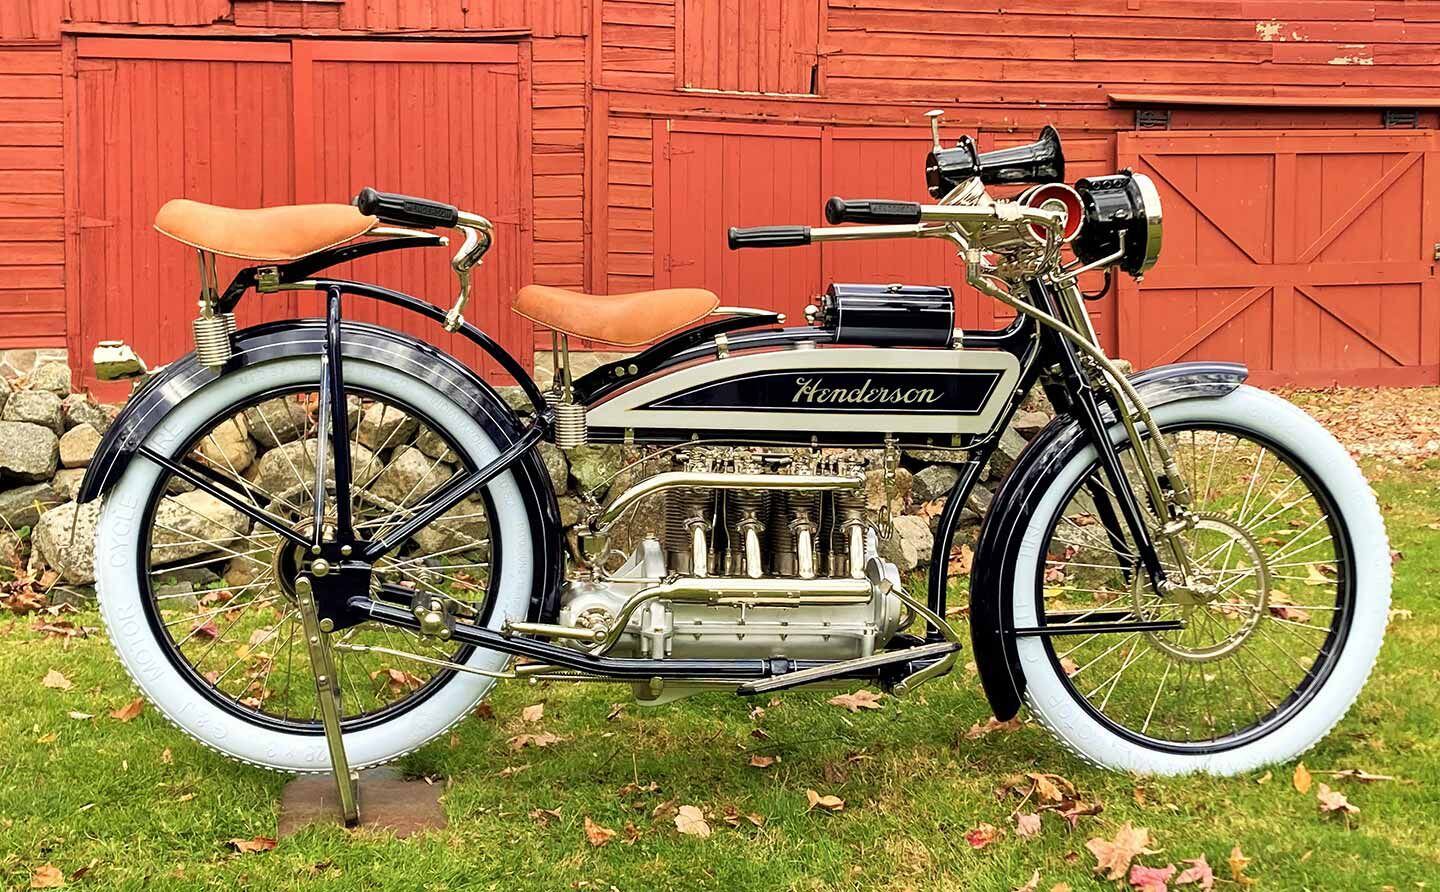 Considered to be the fathers of the American inline four-cylinder motorcycles, the Henderson brothers built what many thought to be the “Duesenberg of motorcycles.”